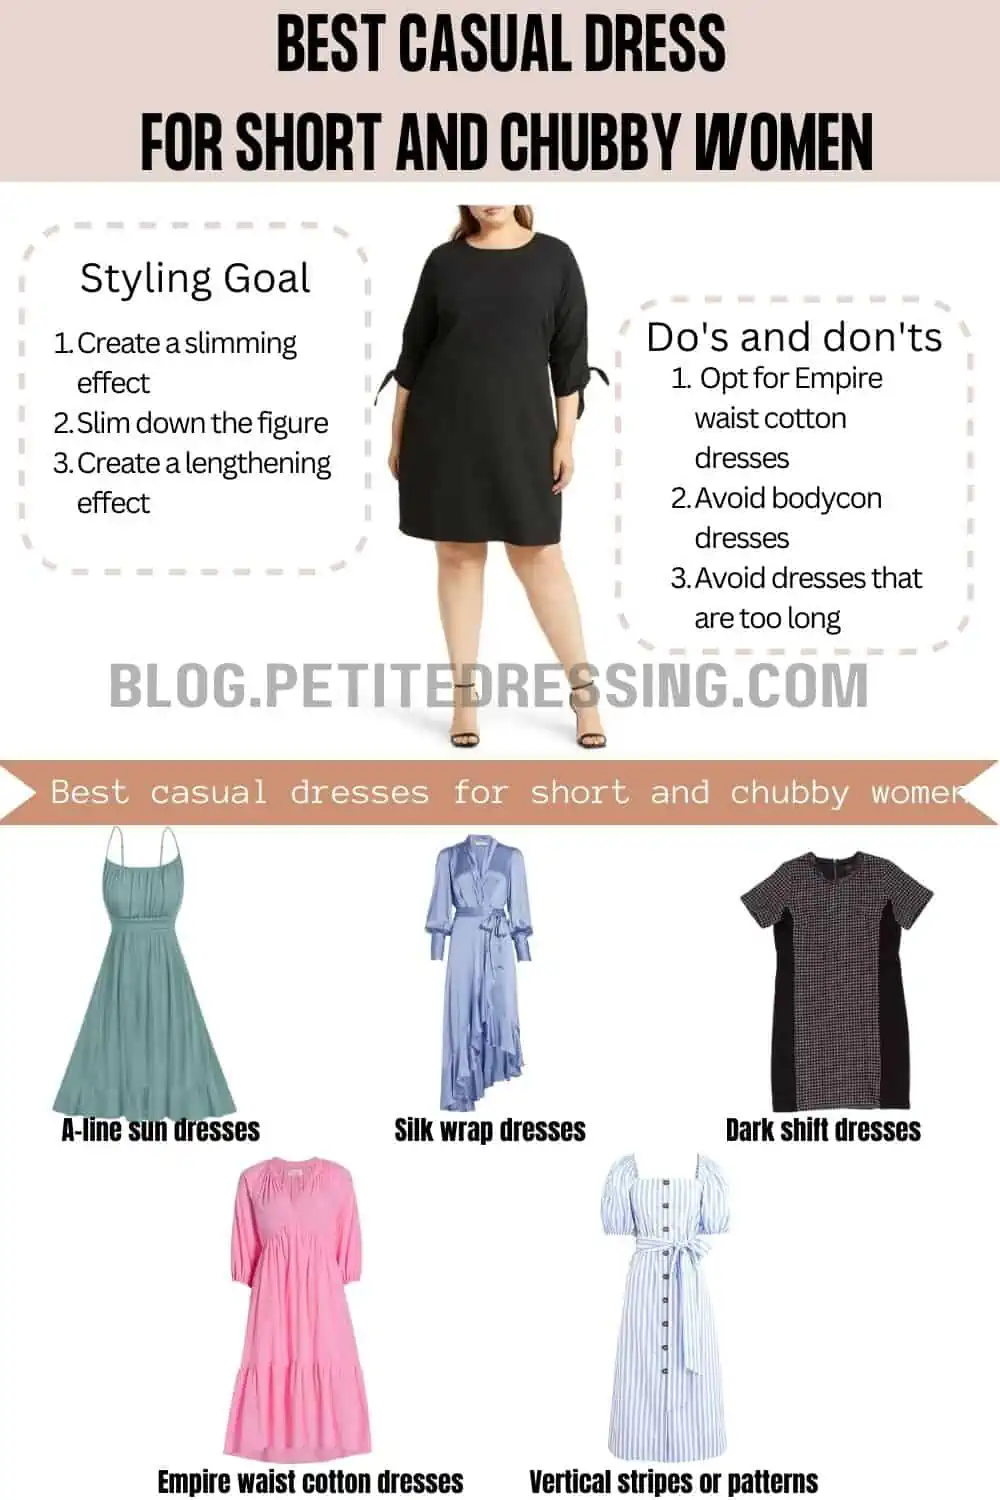 Casual Dress Guide for Short and Chubby women - Petite Dressing